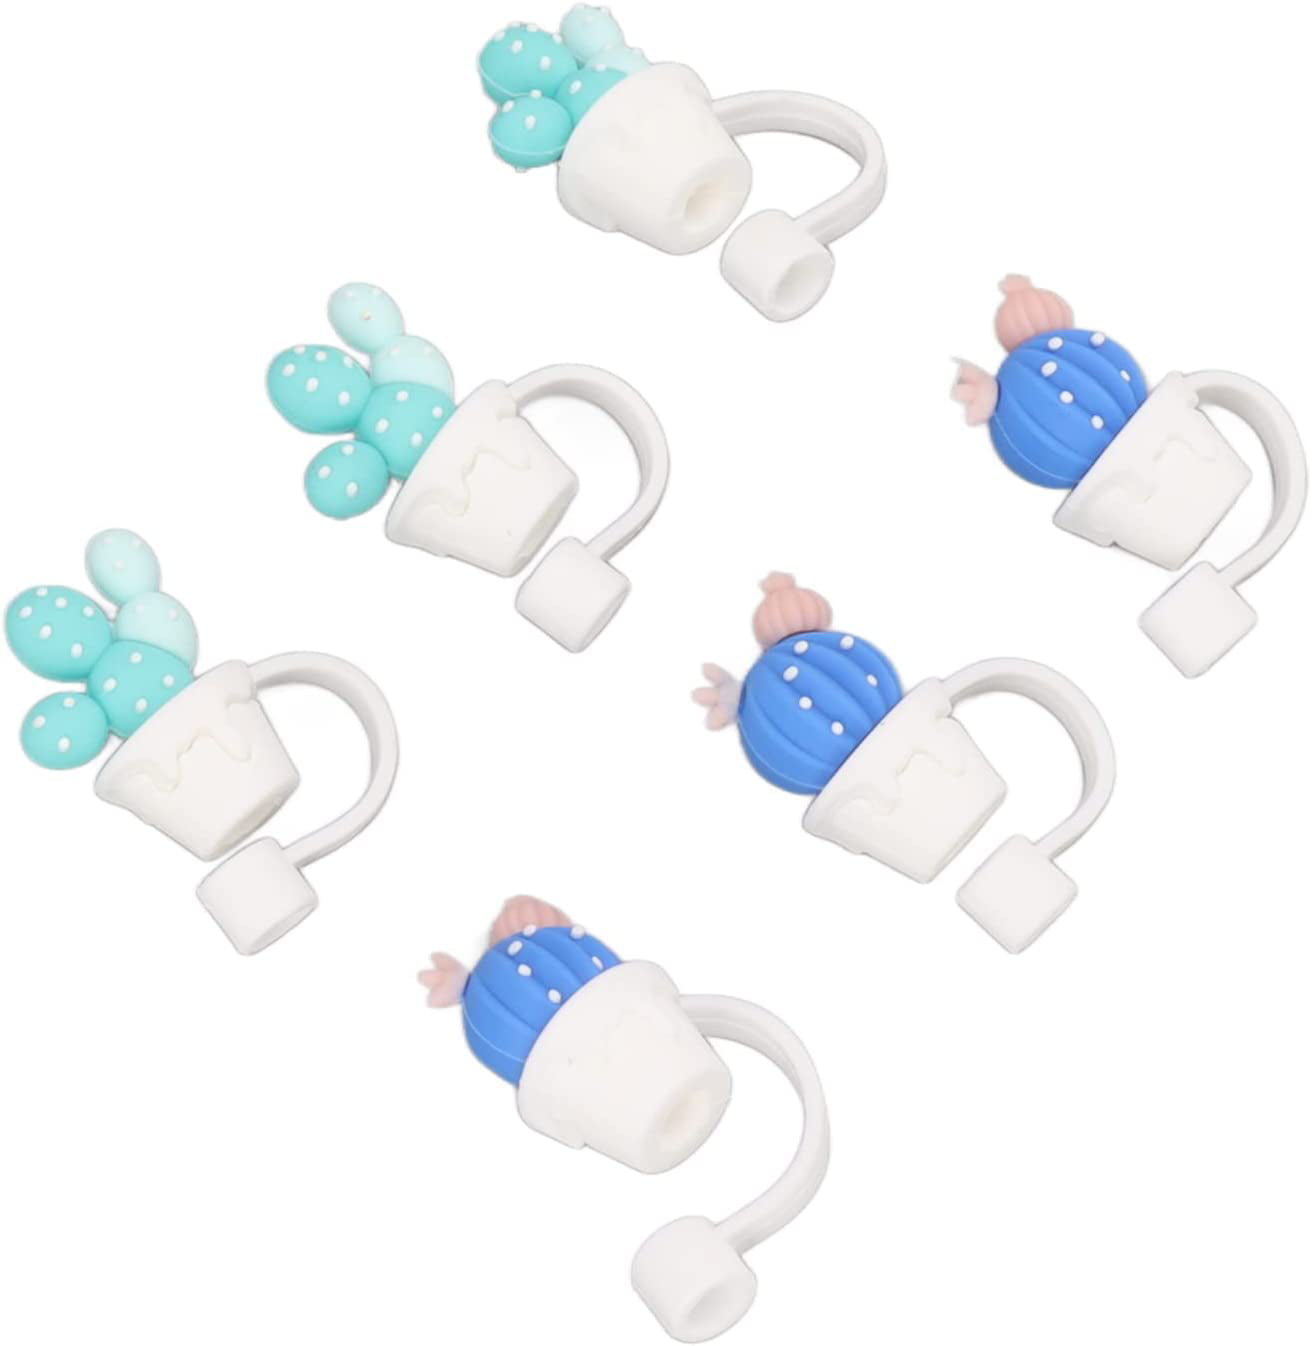 Silicone Bad Bunny Straw Toppers Reusable, Decorative Accessories For 8mm  Straws, Splash Proof & Dust Proof Perfect For Parties! From  Amandagogogo2022, $0.22